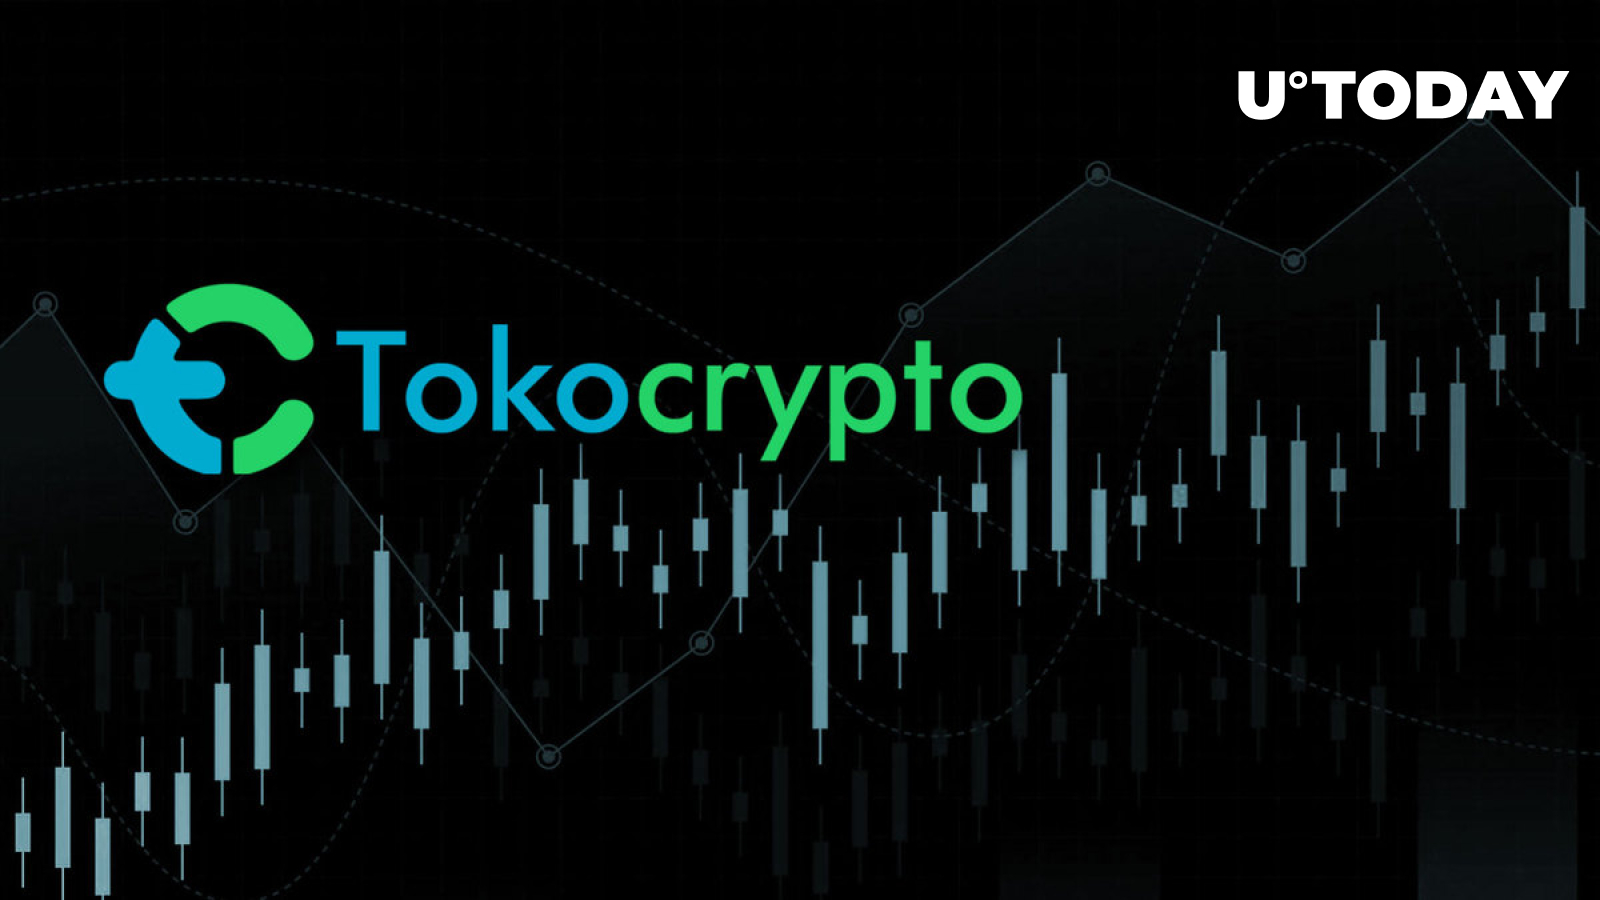 Here’s Why TKO Pumps 97% and What Binance Has to Do with It